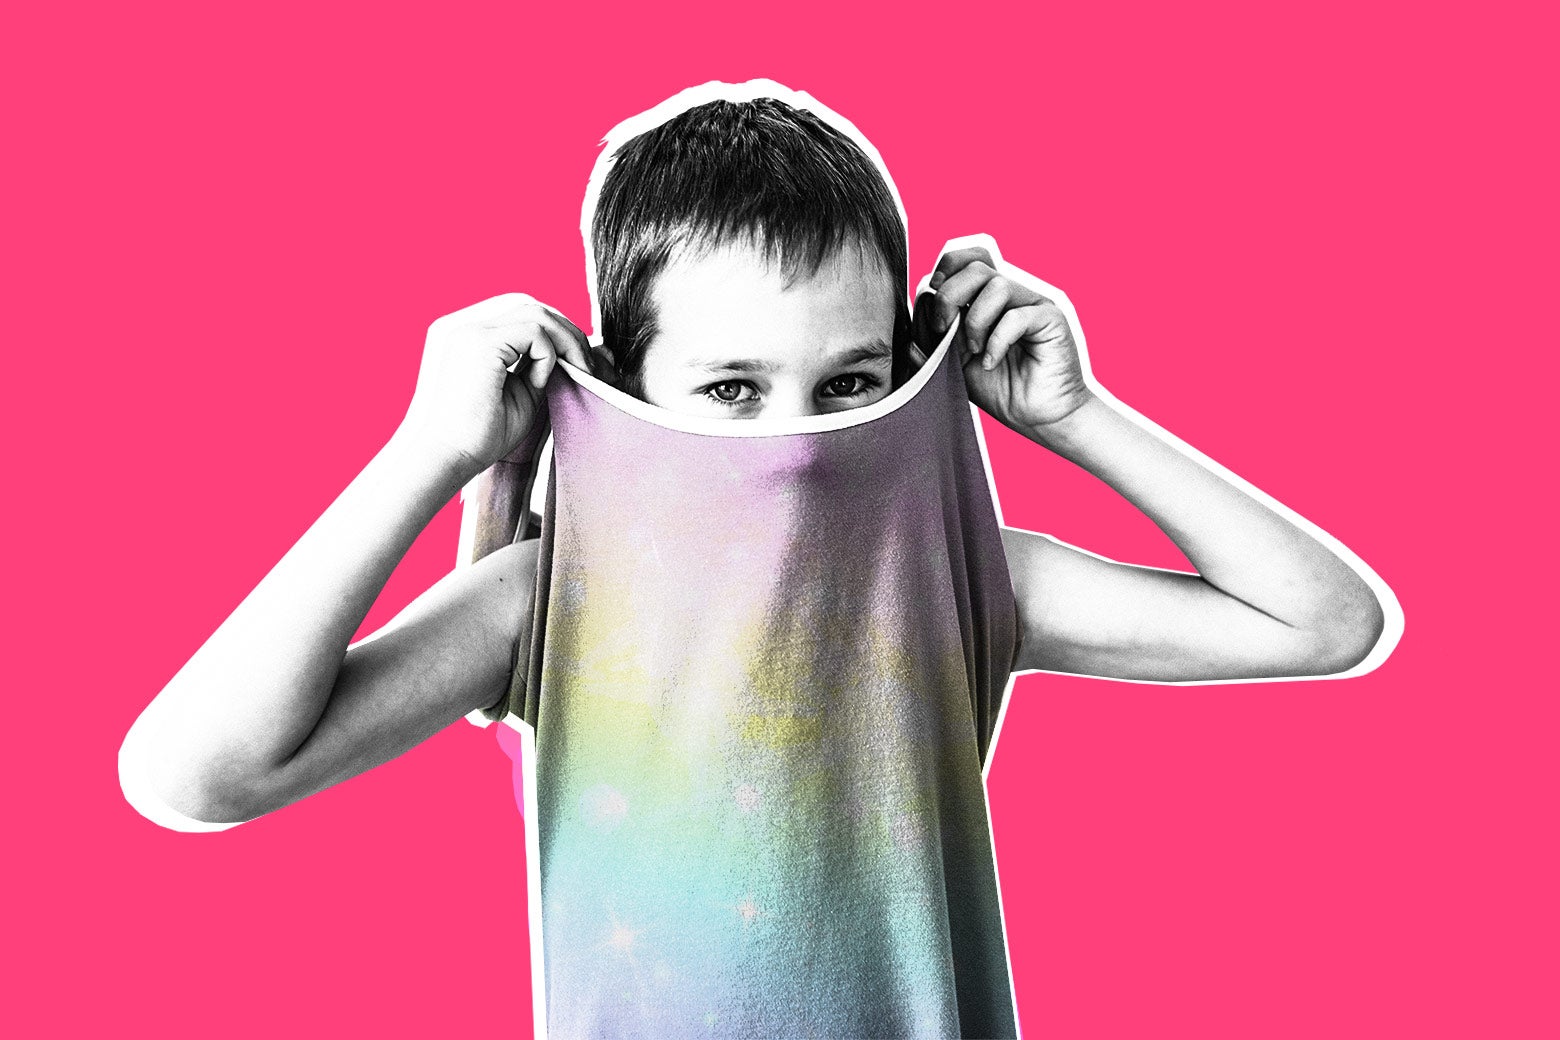 Child removing a dress by pulling it over their head, against a pink background.